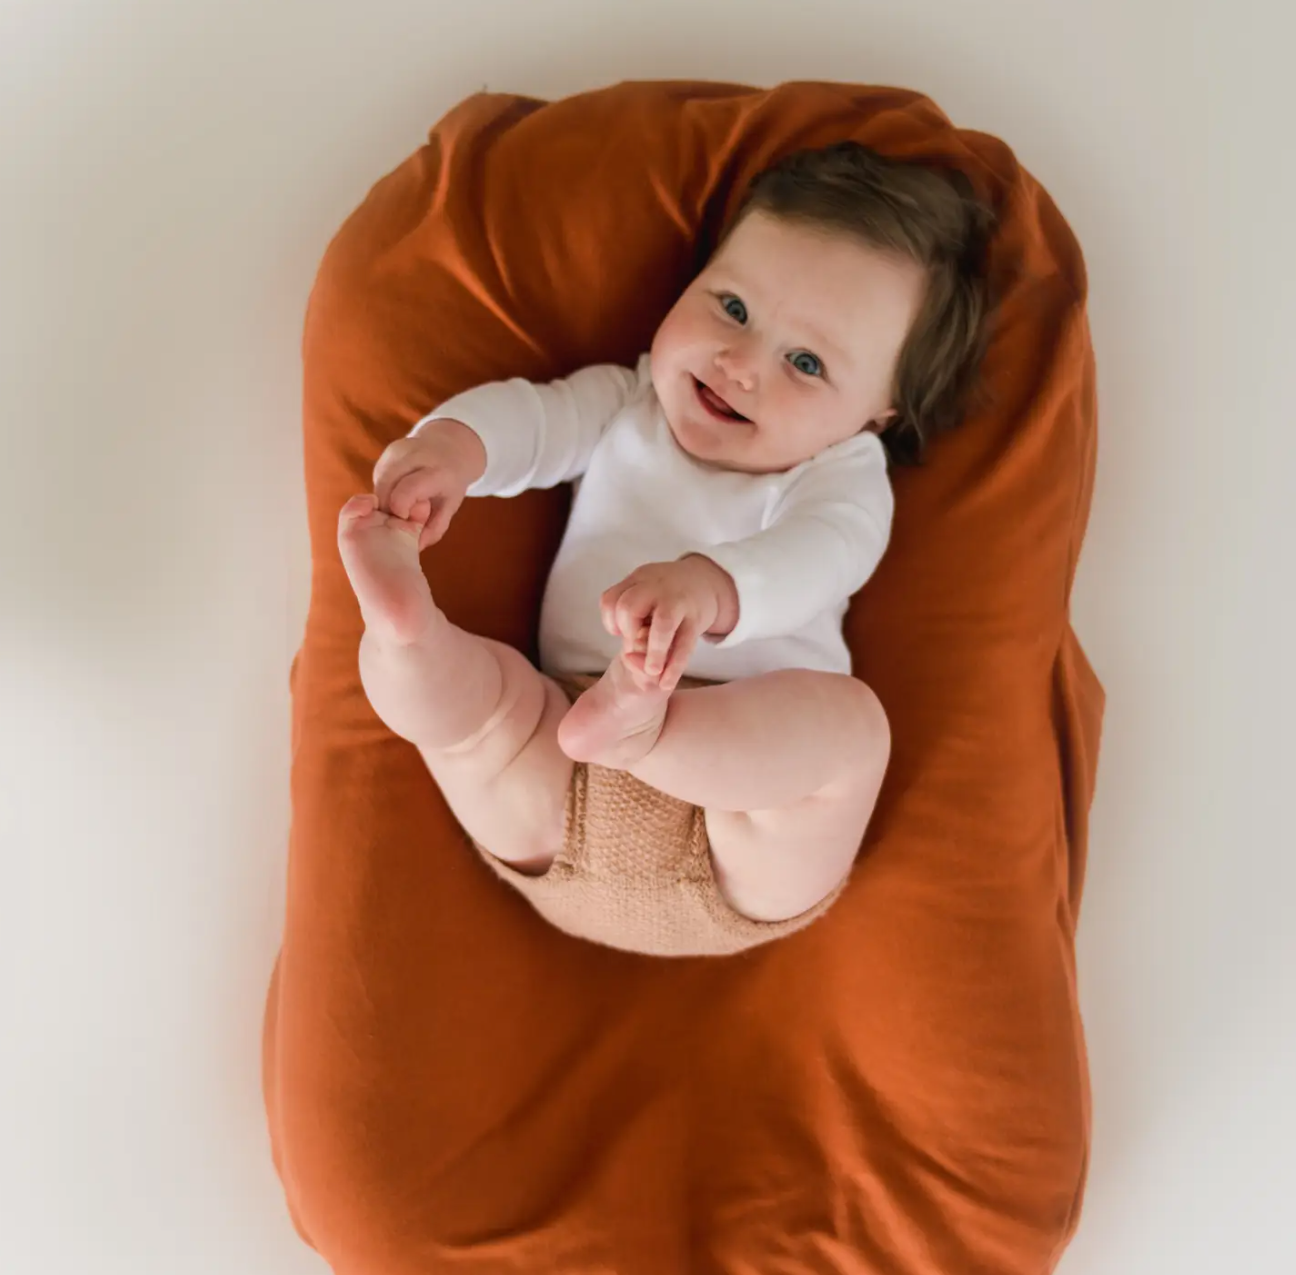 Snuggle Me Organic Infant Lounger Covers